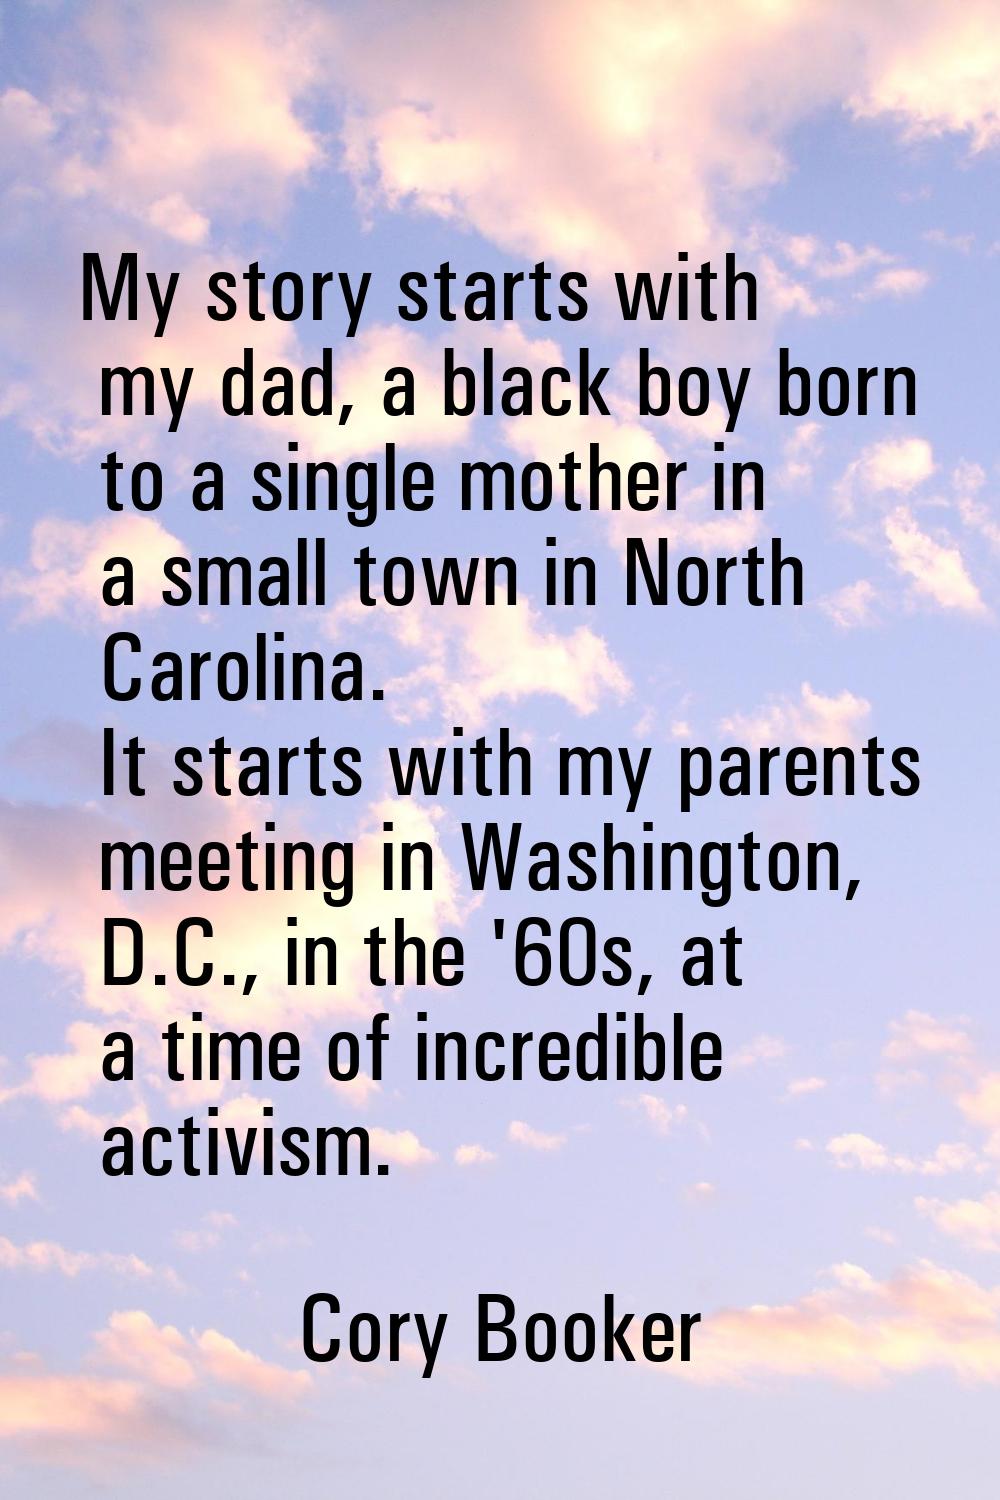 My story starts with my dad, a black boy born to a single mother in a small town in North Carolina.